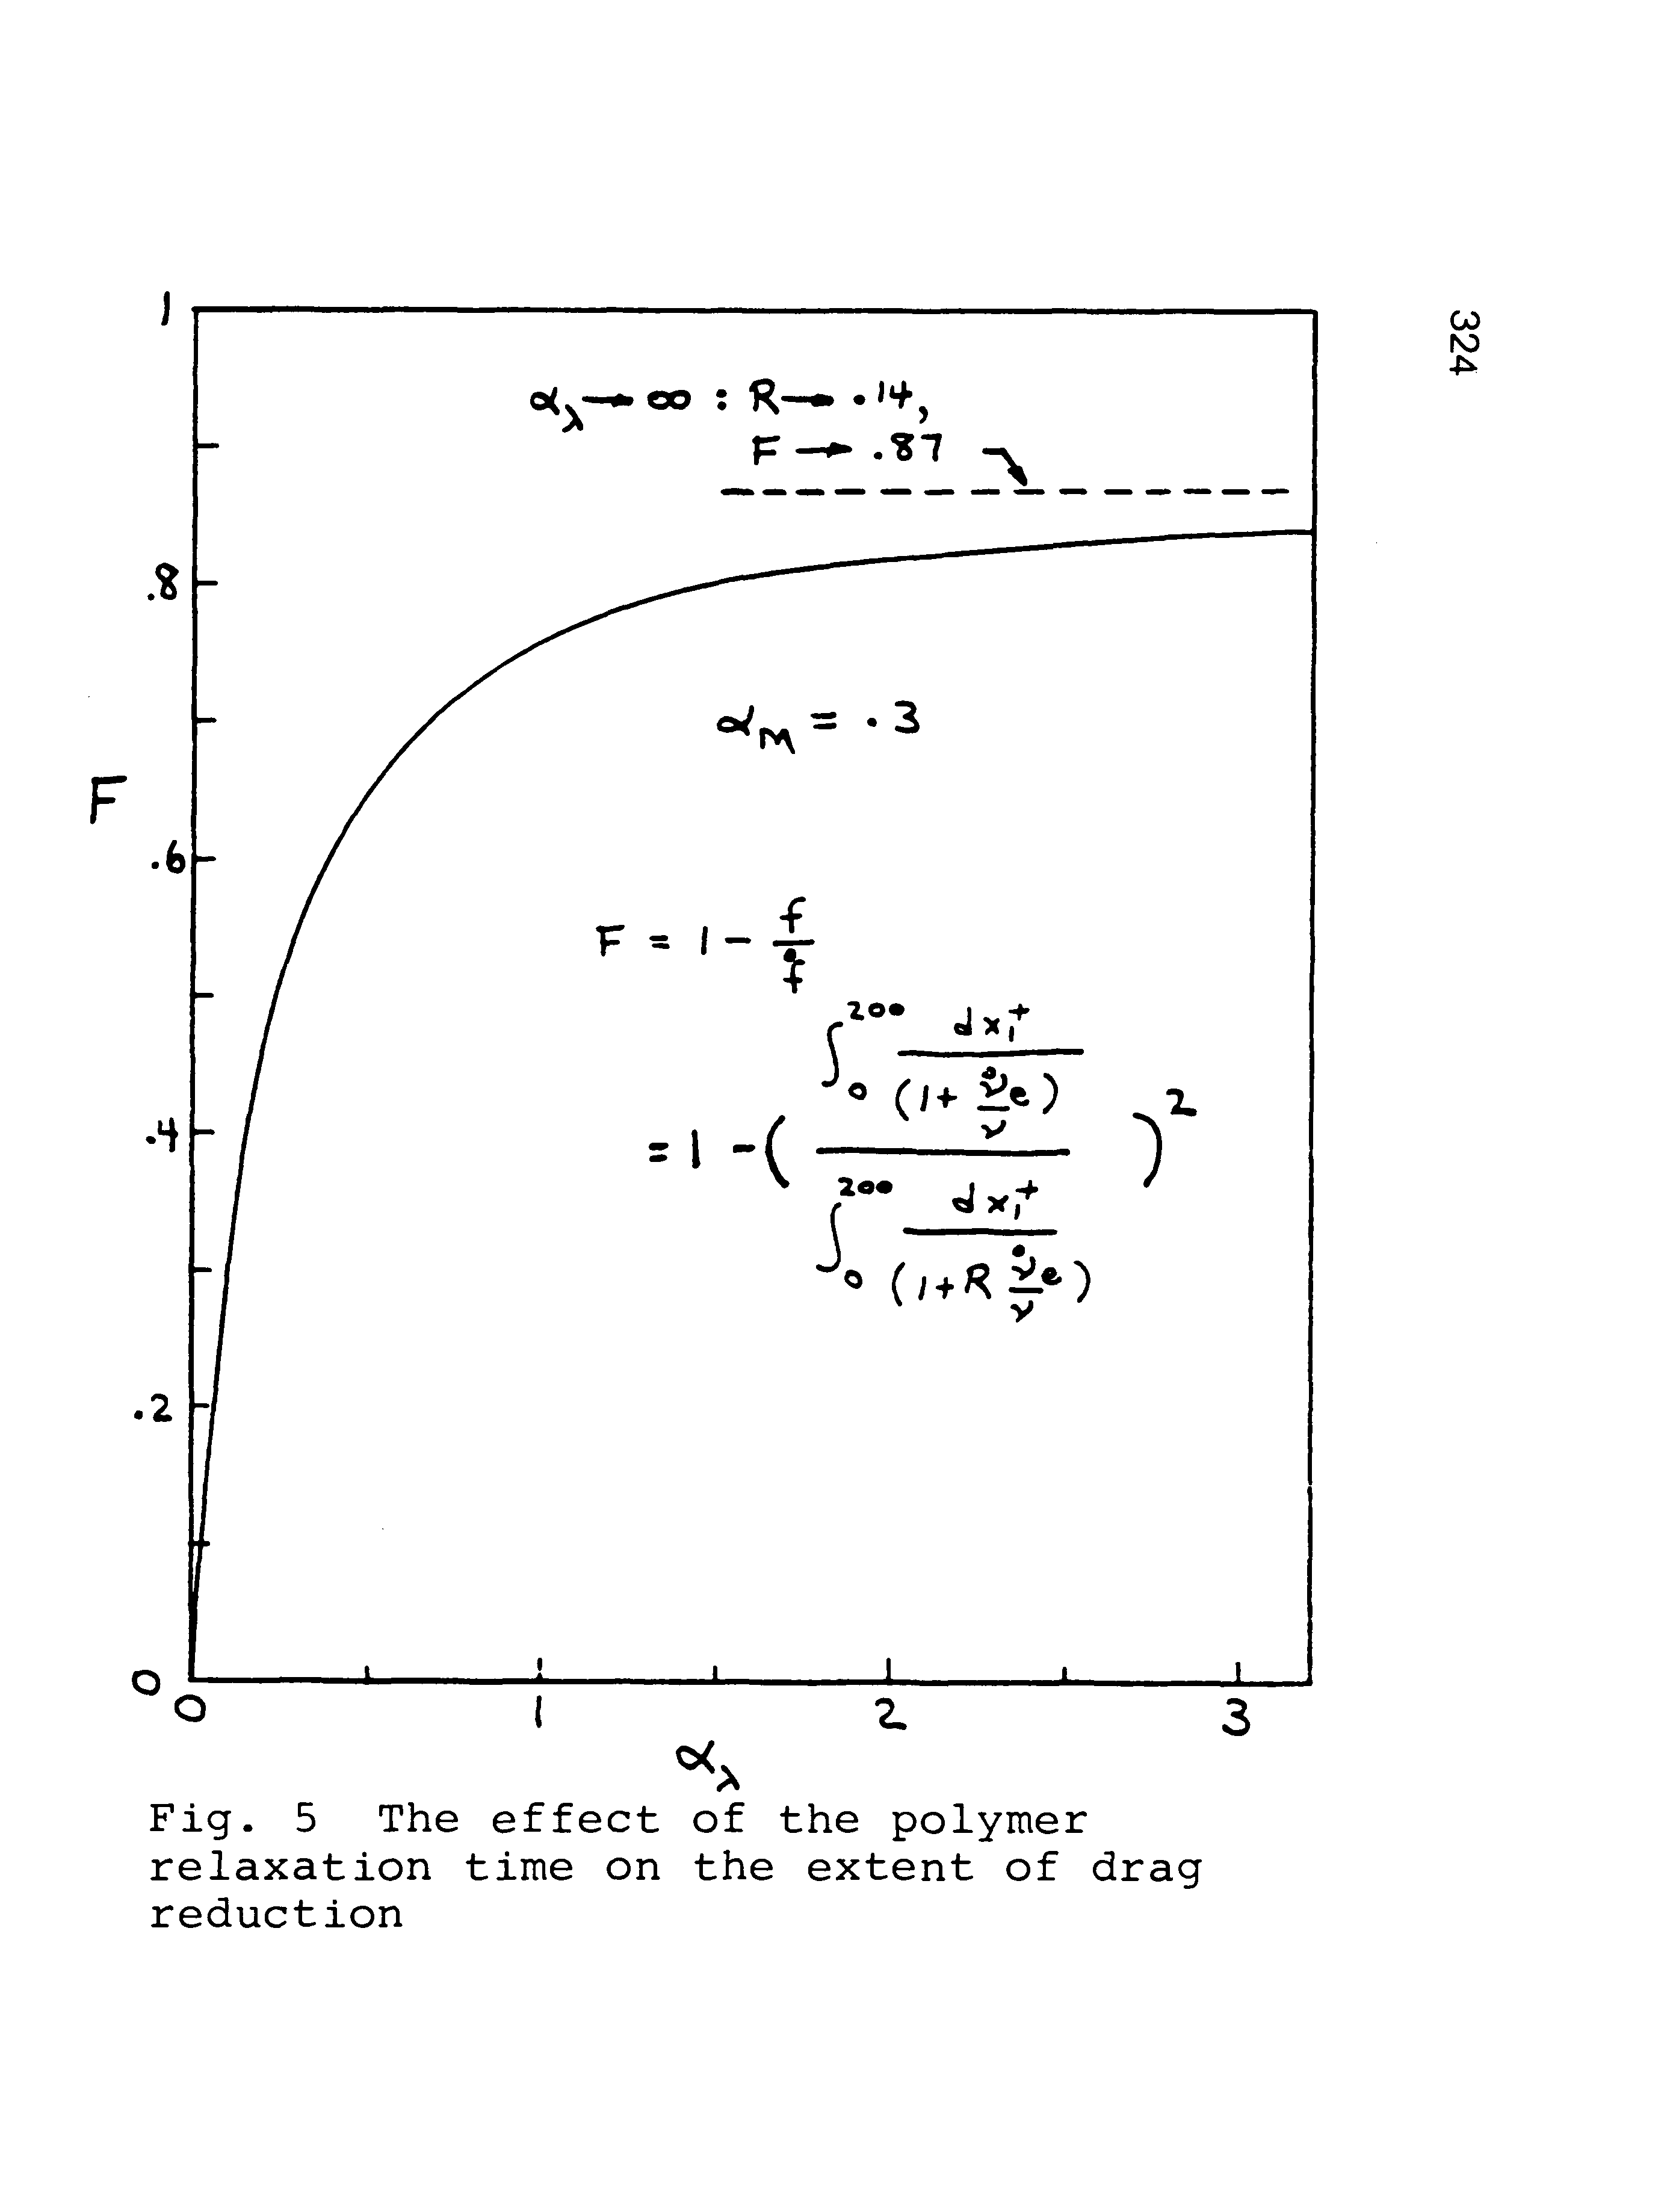 Fig. 5 The effect of the polymer relaxation time on the extent of c3rag reciuction...